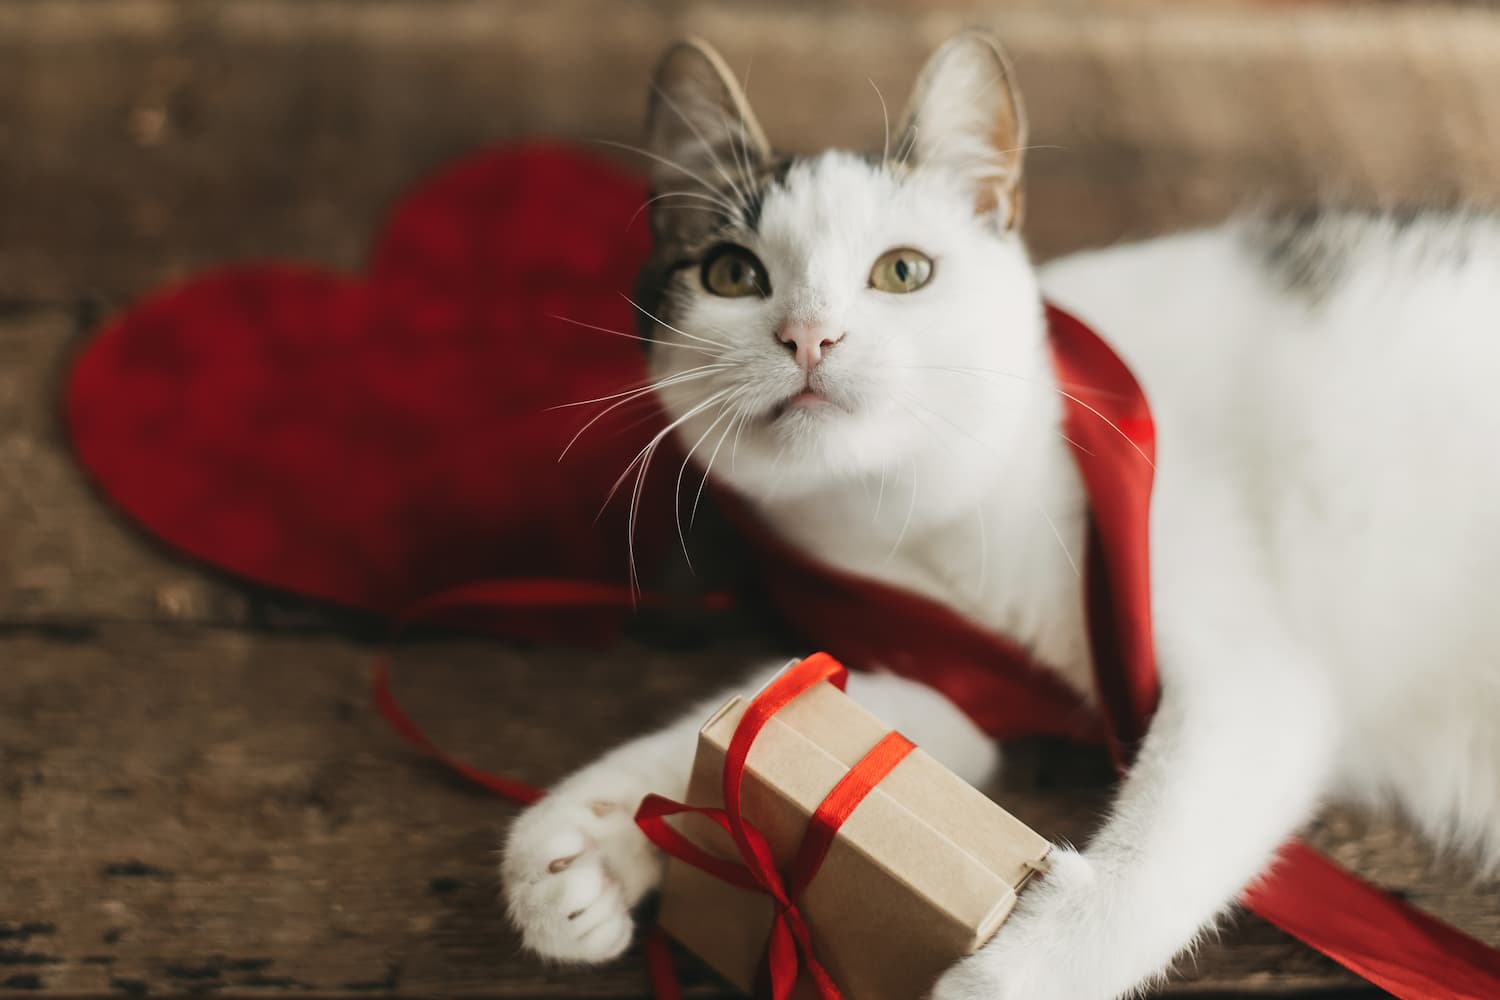 adorable-cat-playing-with-red-ribbon-and-gift-box-2021-08-30-12-04-27-utc-1